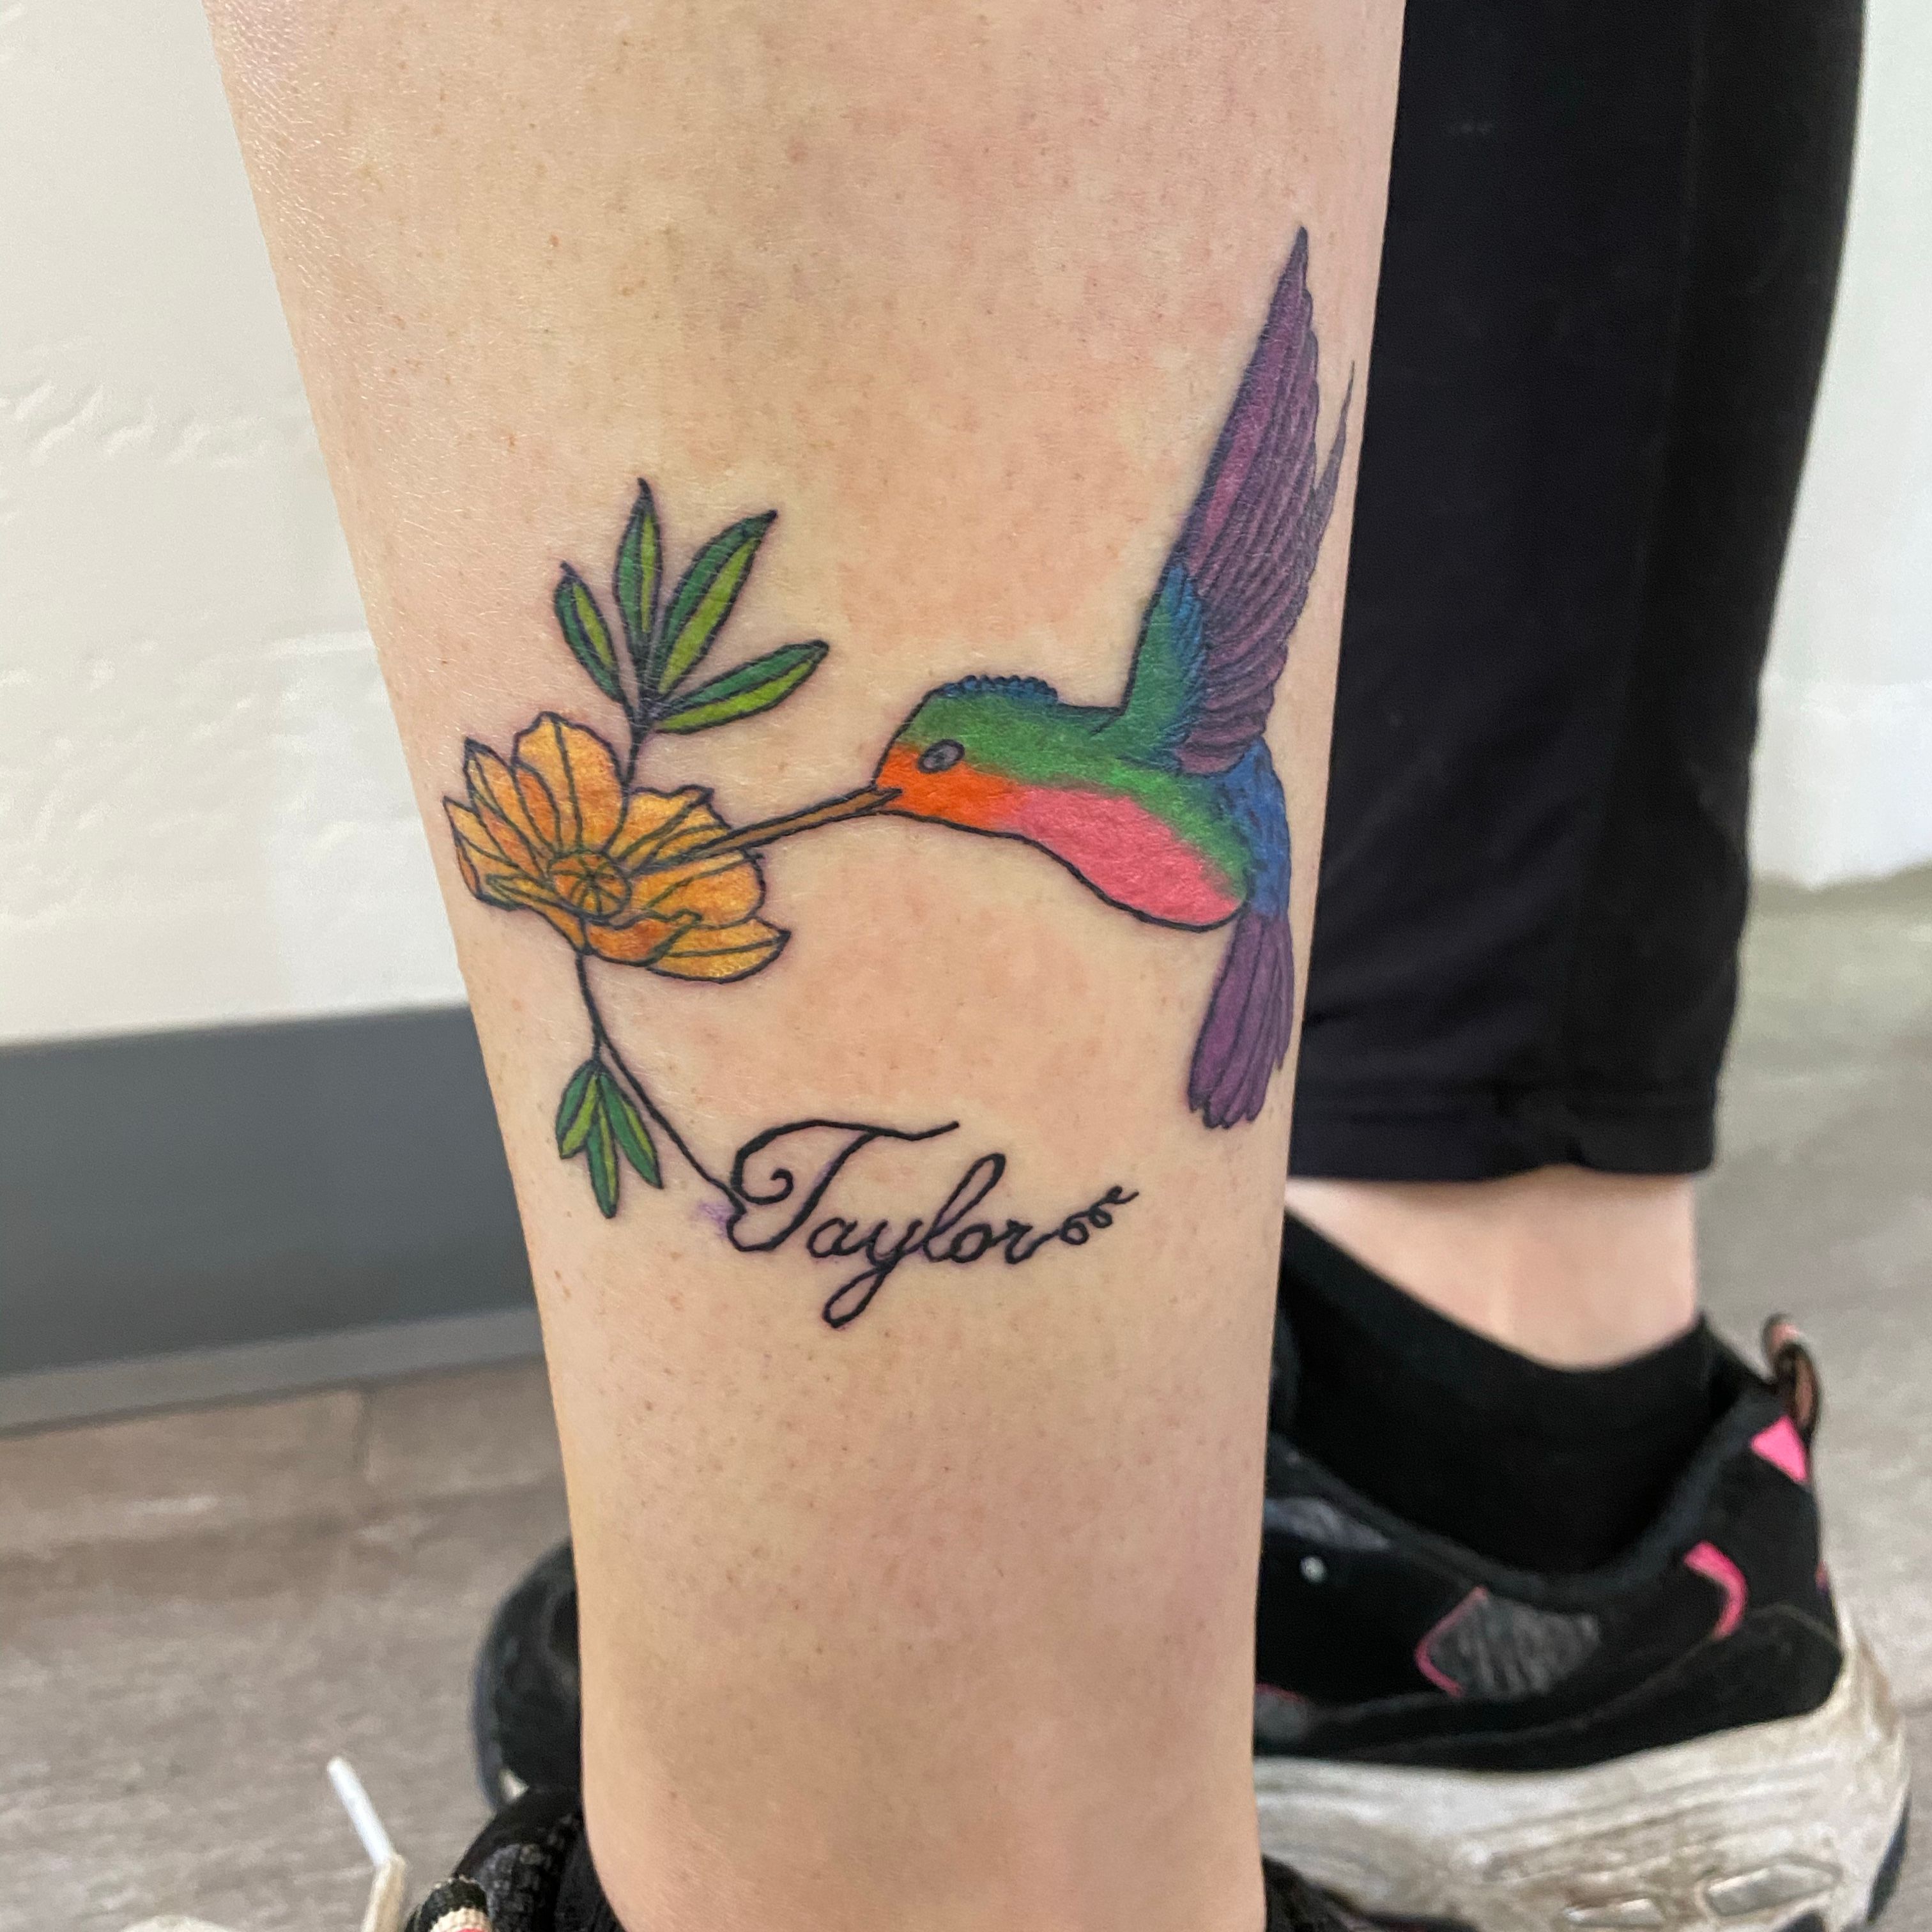 A watercolor hummingbird with alstroemerias! Thanks for making the trip out  🌺🦜🎨 #watercolortattoo #hummingbirdtattoo #colortatto... | Instagram